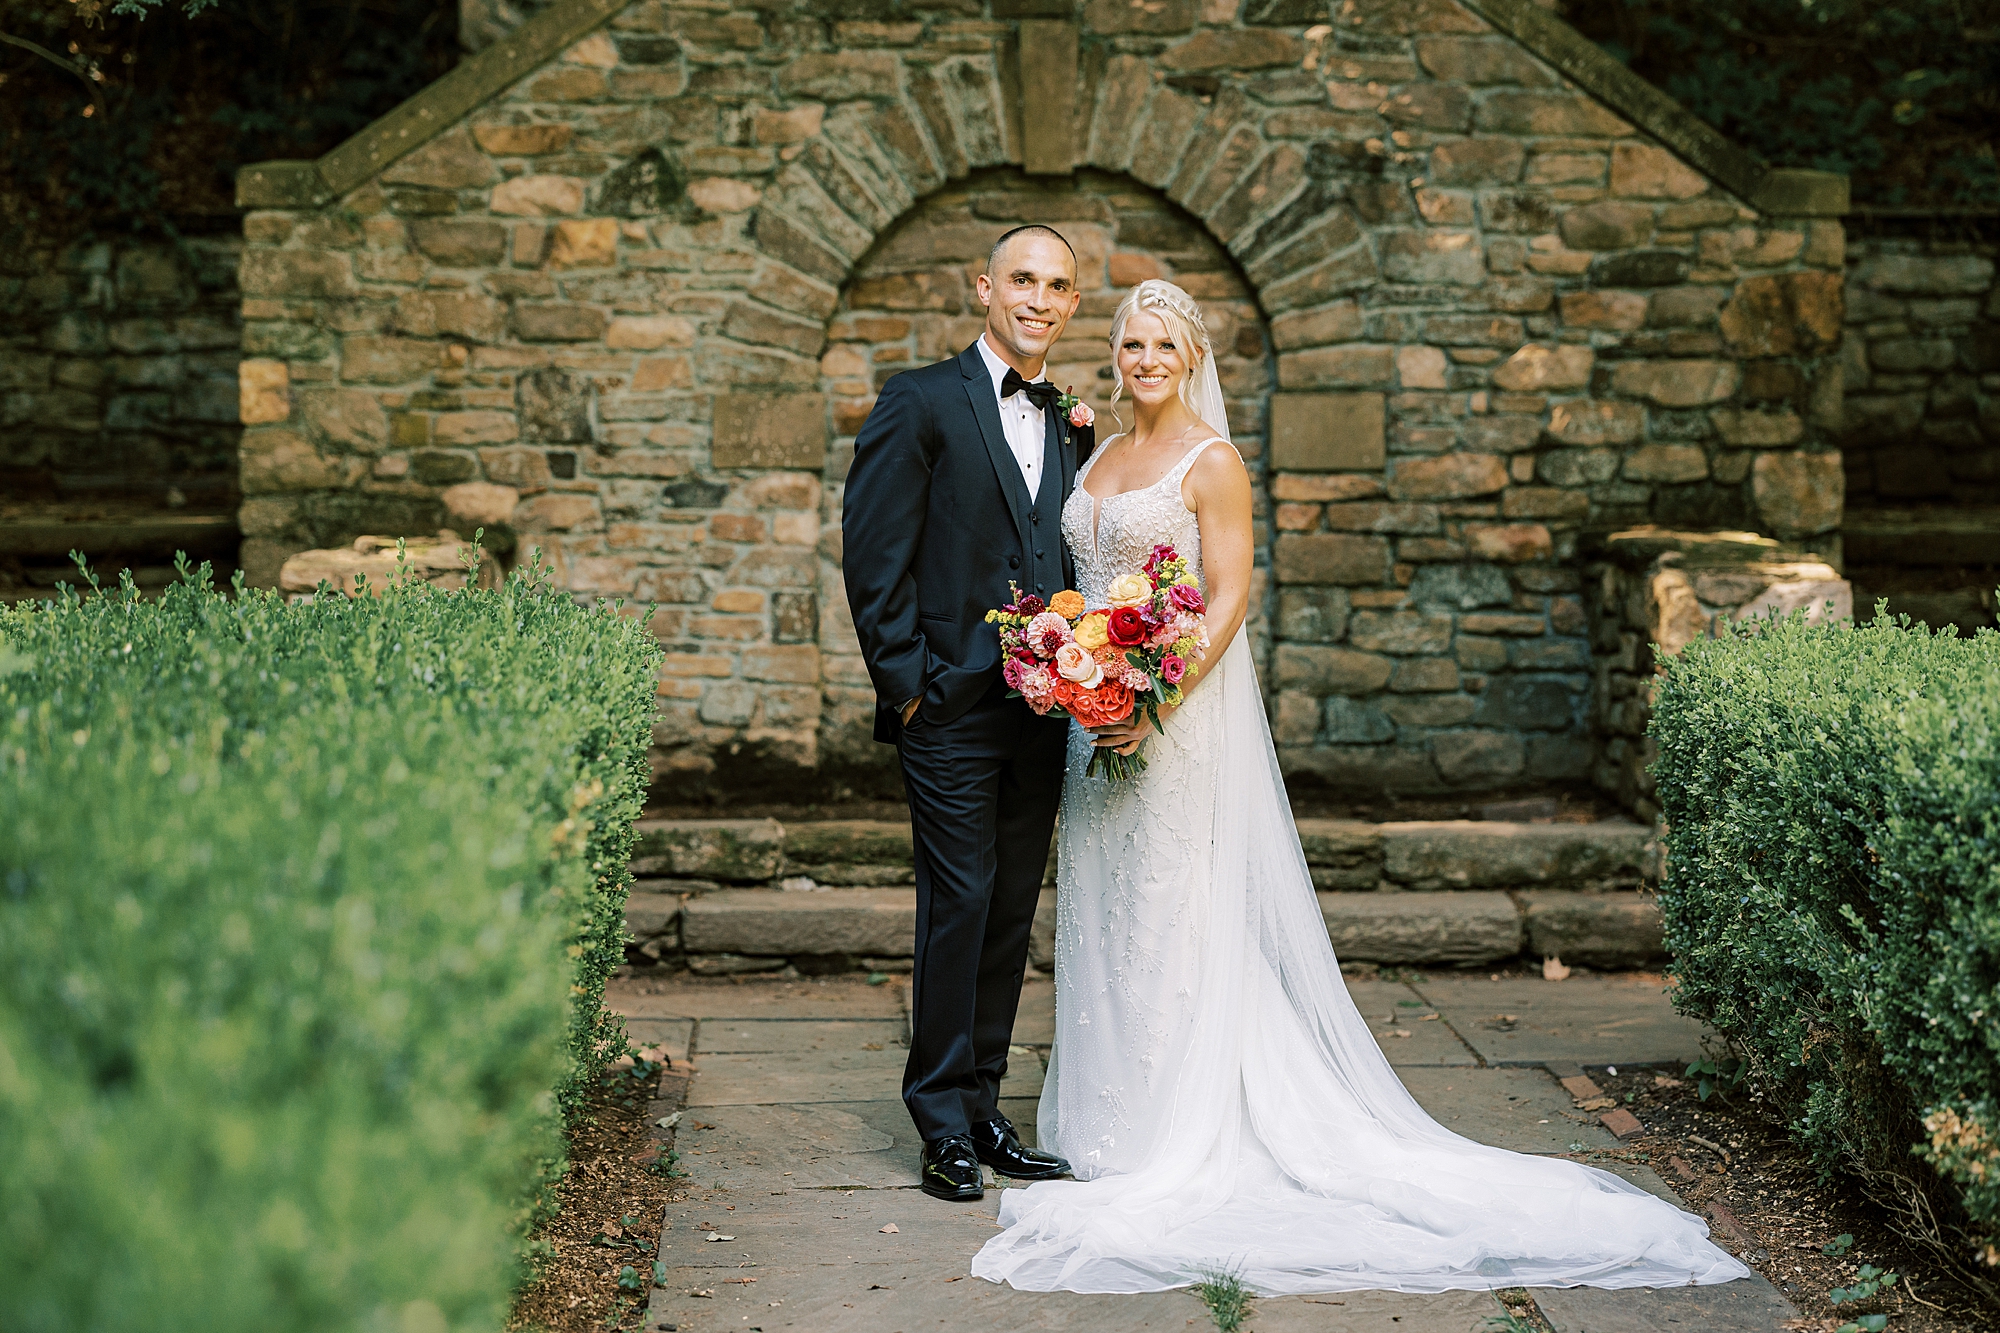 bride and groom pose by stone structure in gardens at Parque Ridley Creek